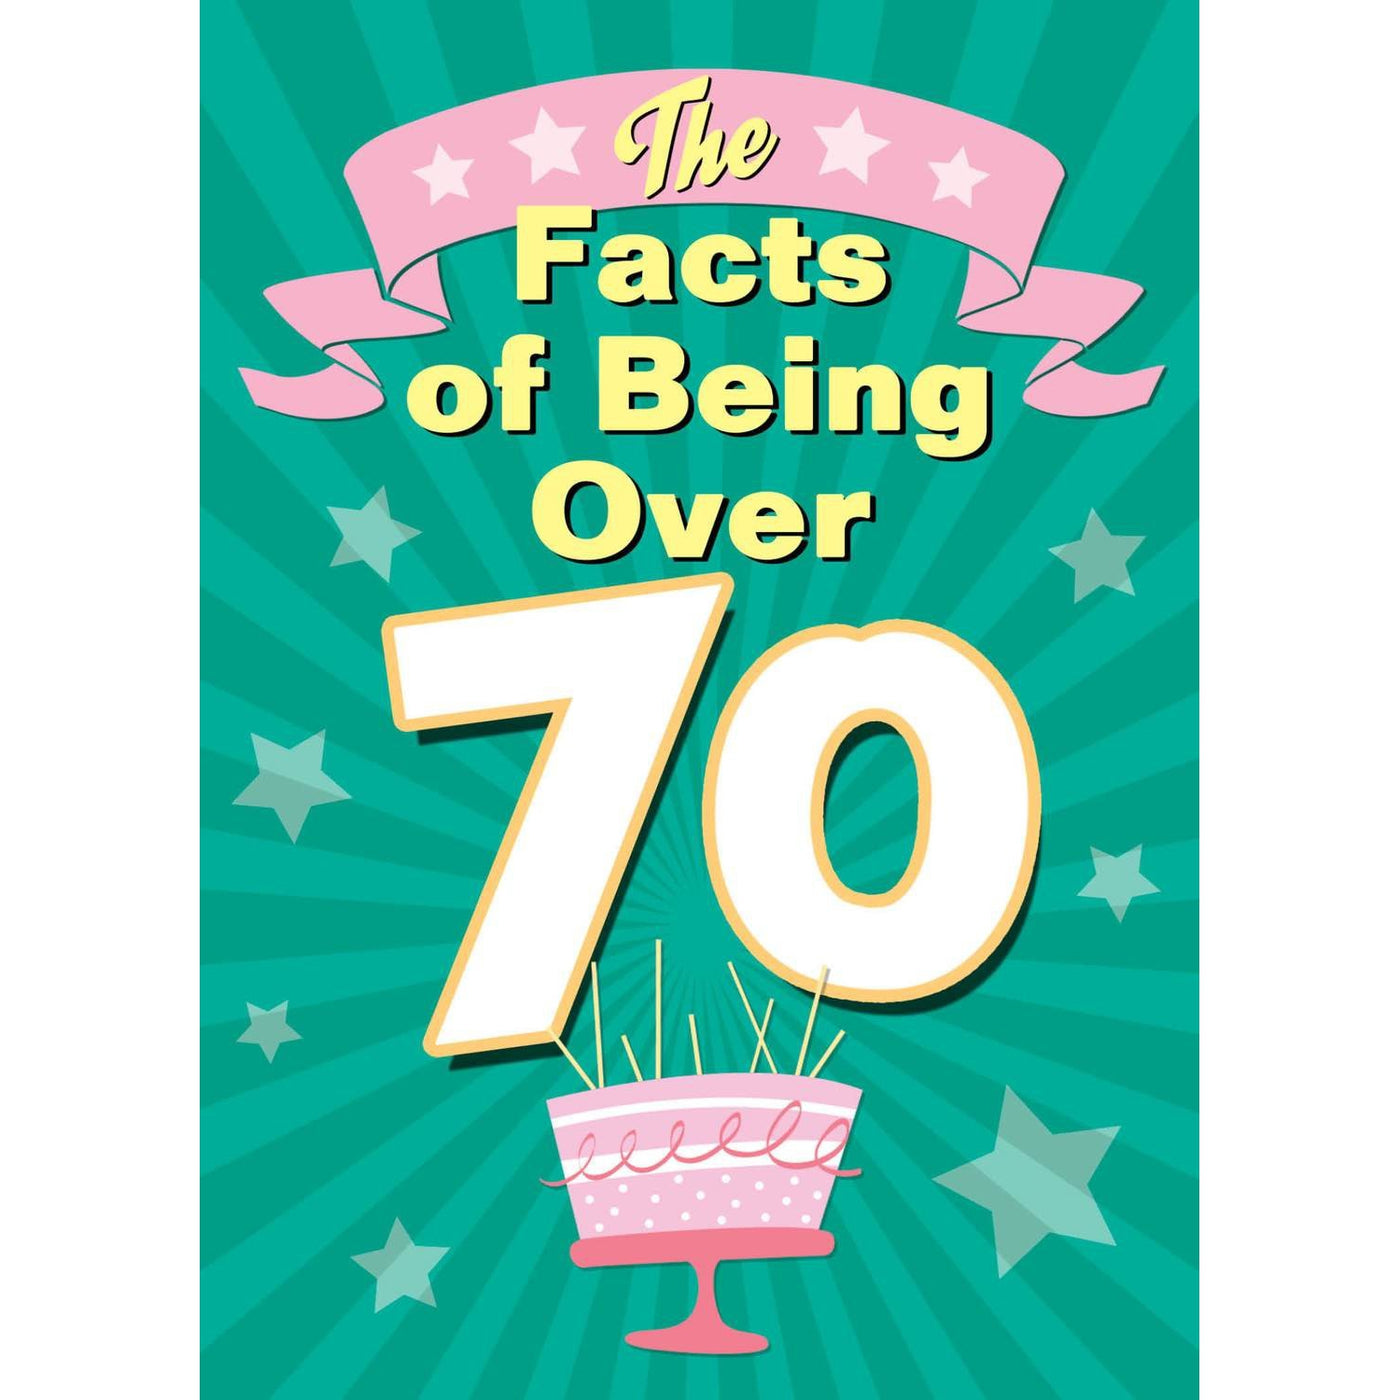 The Facts OF Being Over 70 greeting card